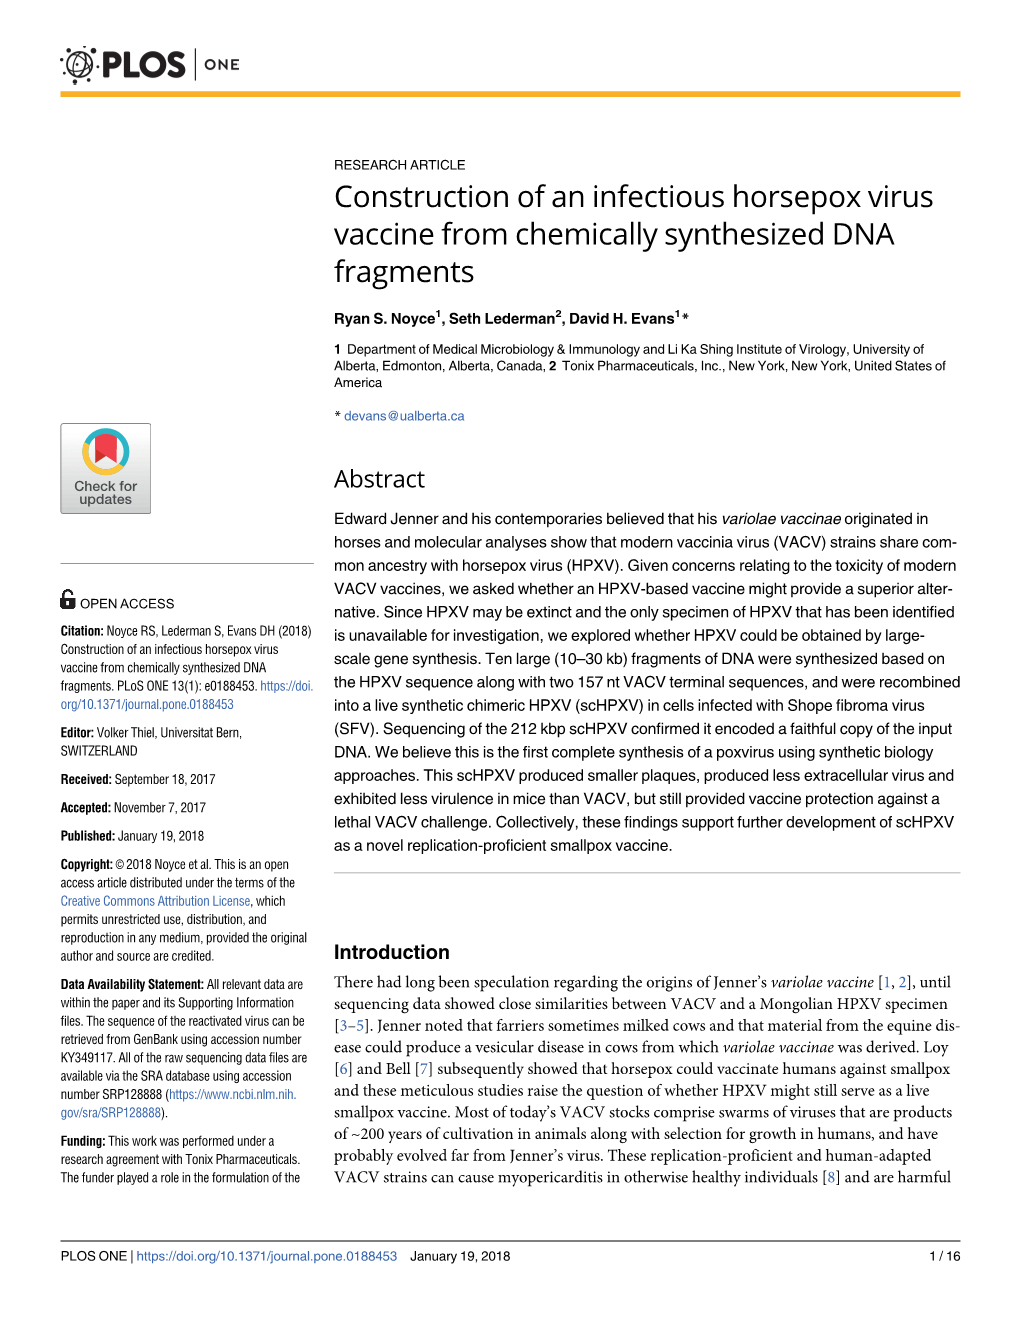 Construction of an Infectious Horsepox Virus Vaccine from Chemically Synthesized DNA Fragments